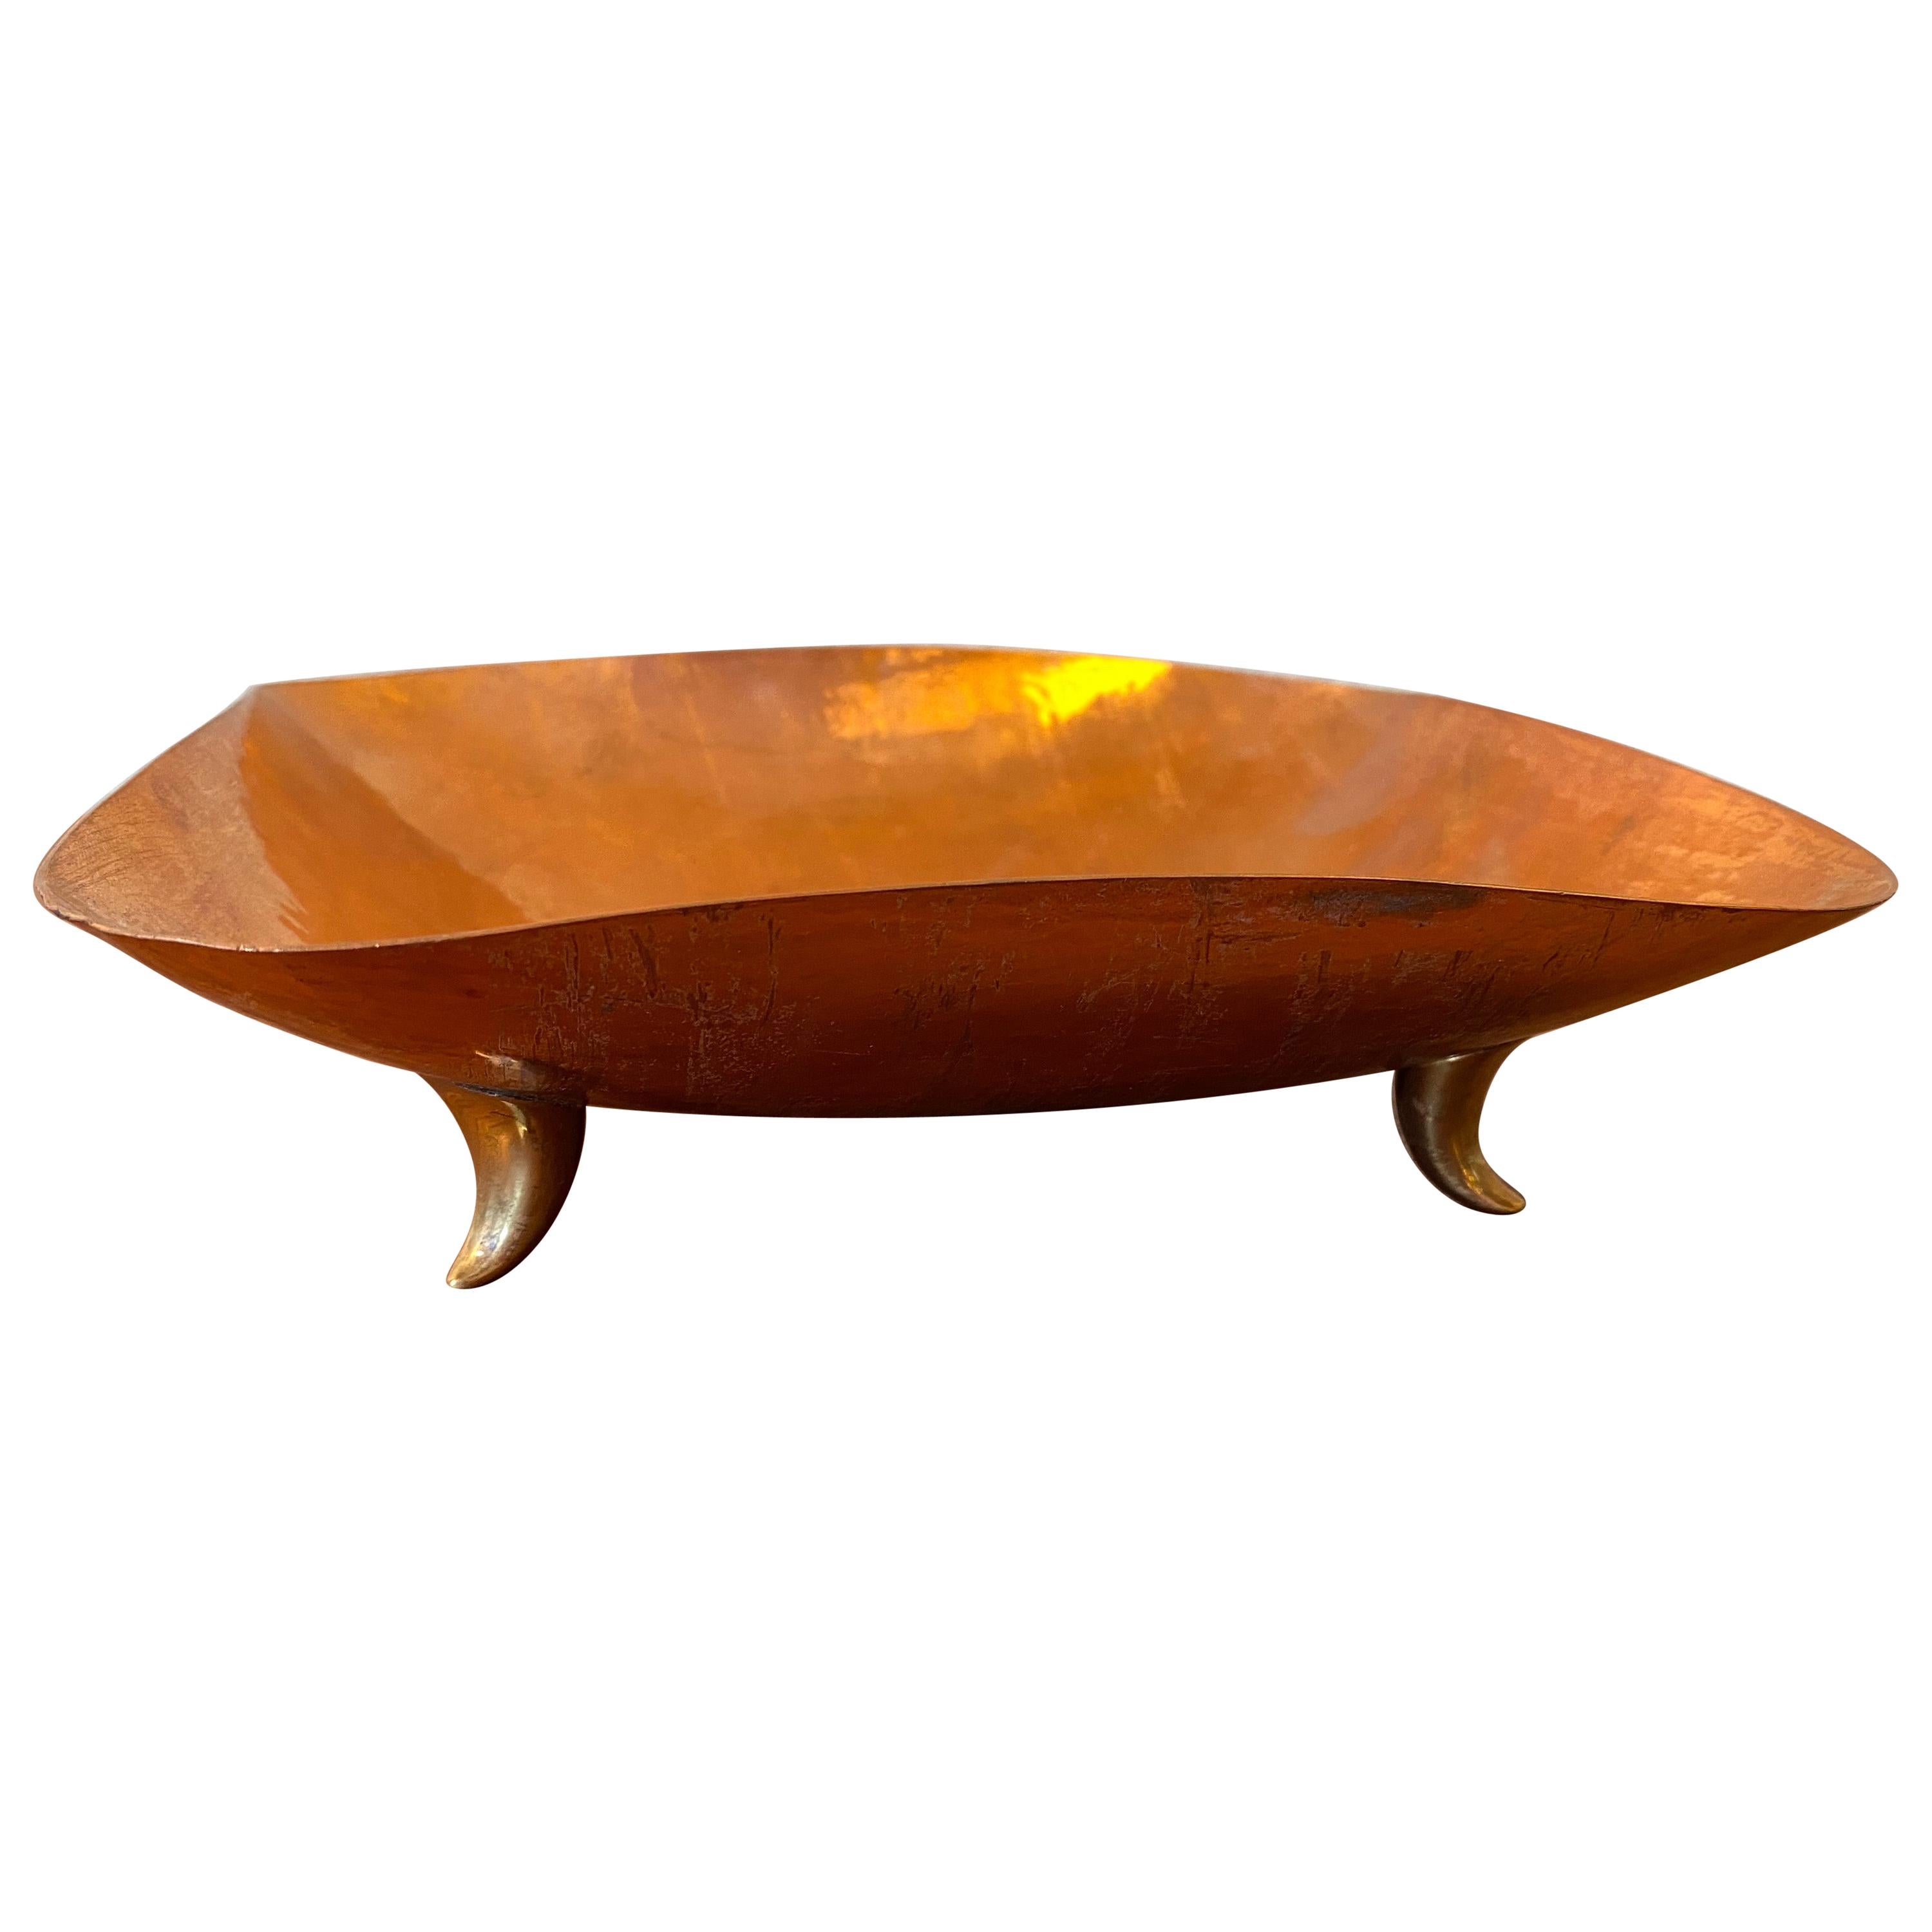 Karl Hagenauer Hand-Hammered Footed Copper and Brass Bowl For Sale